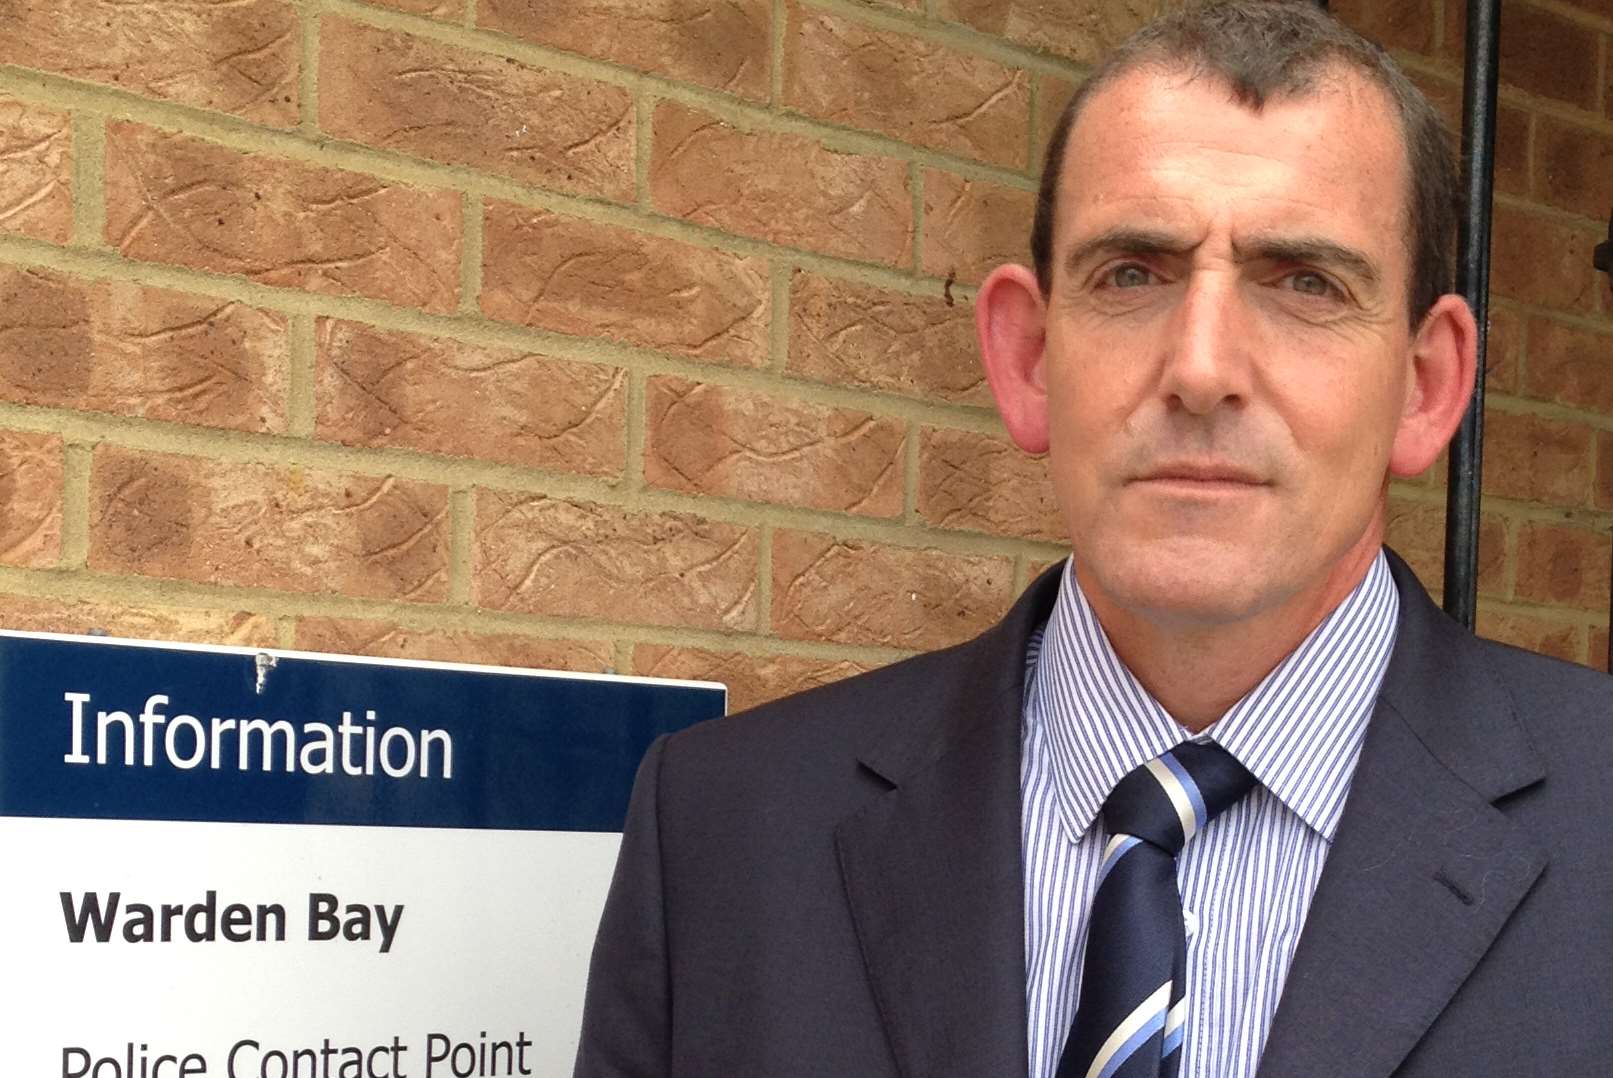 DCI Jon Clayden, of the Kent and Essex Serious Crime Directorate